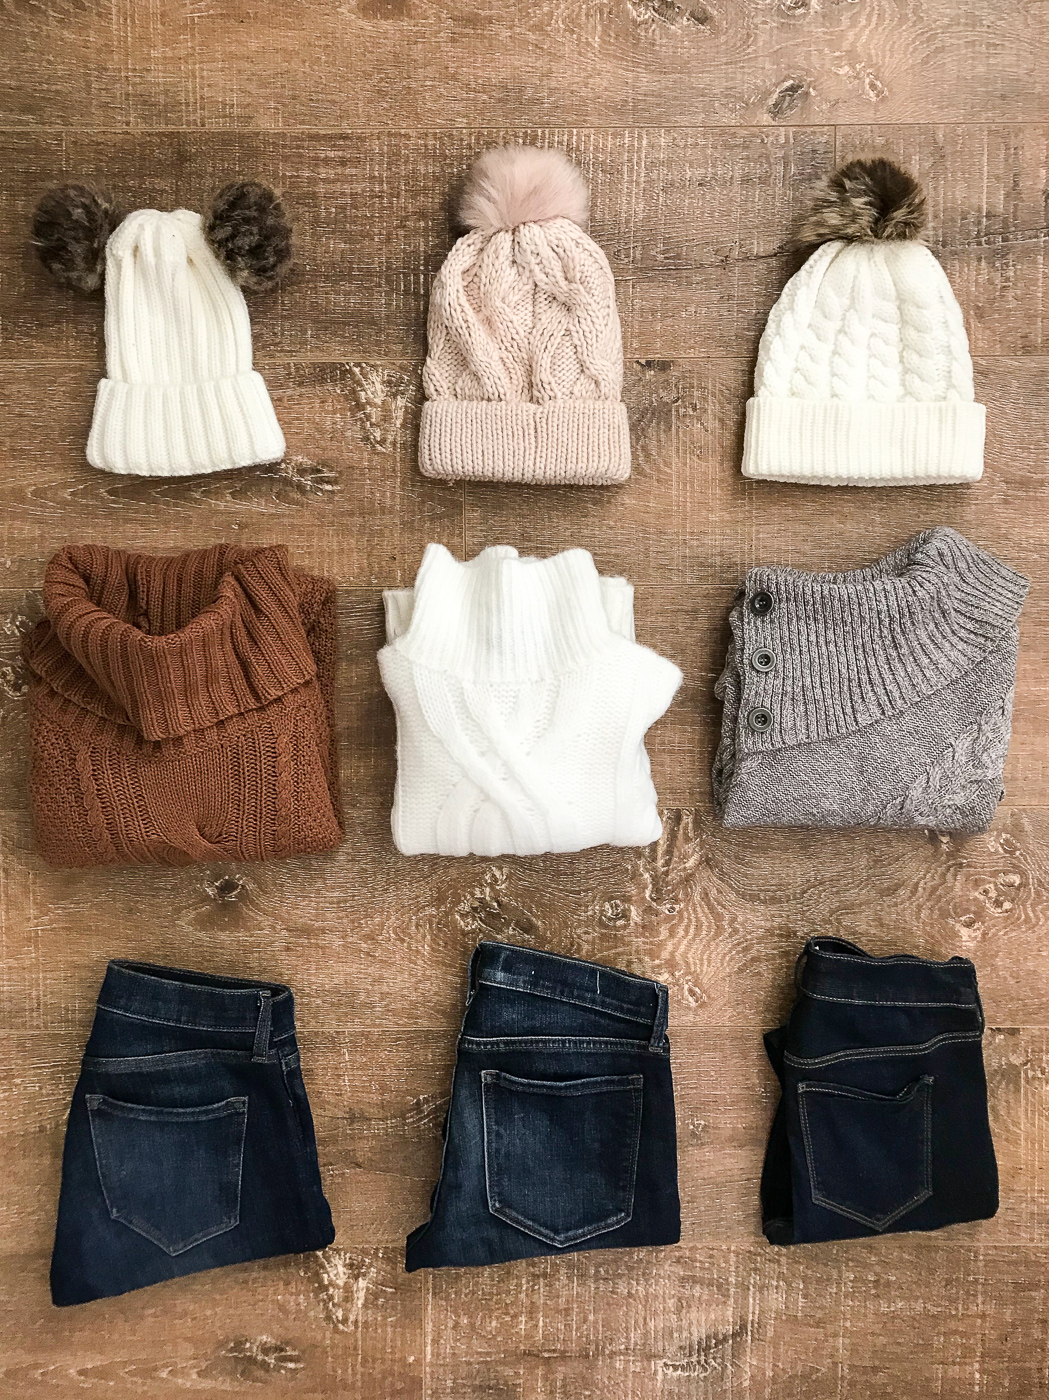 cable knit hats chunky sweaters petite denim jeans flatlay